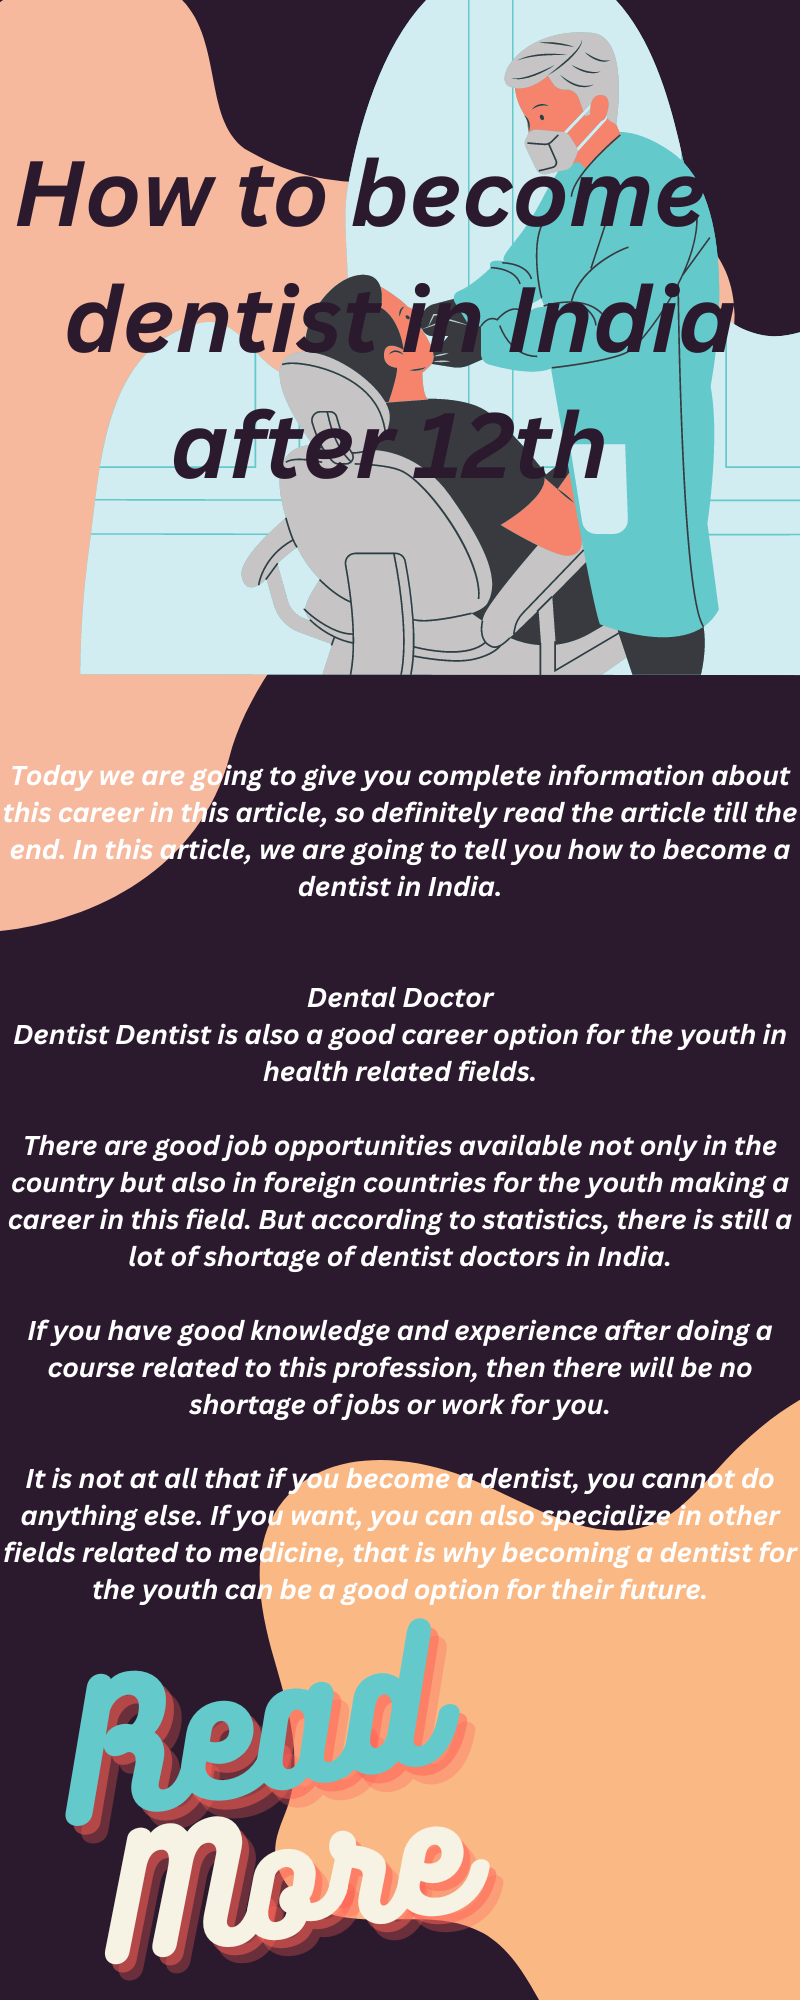 How to become a dentist